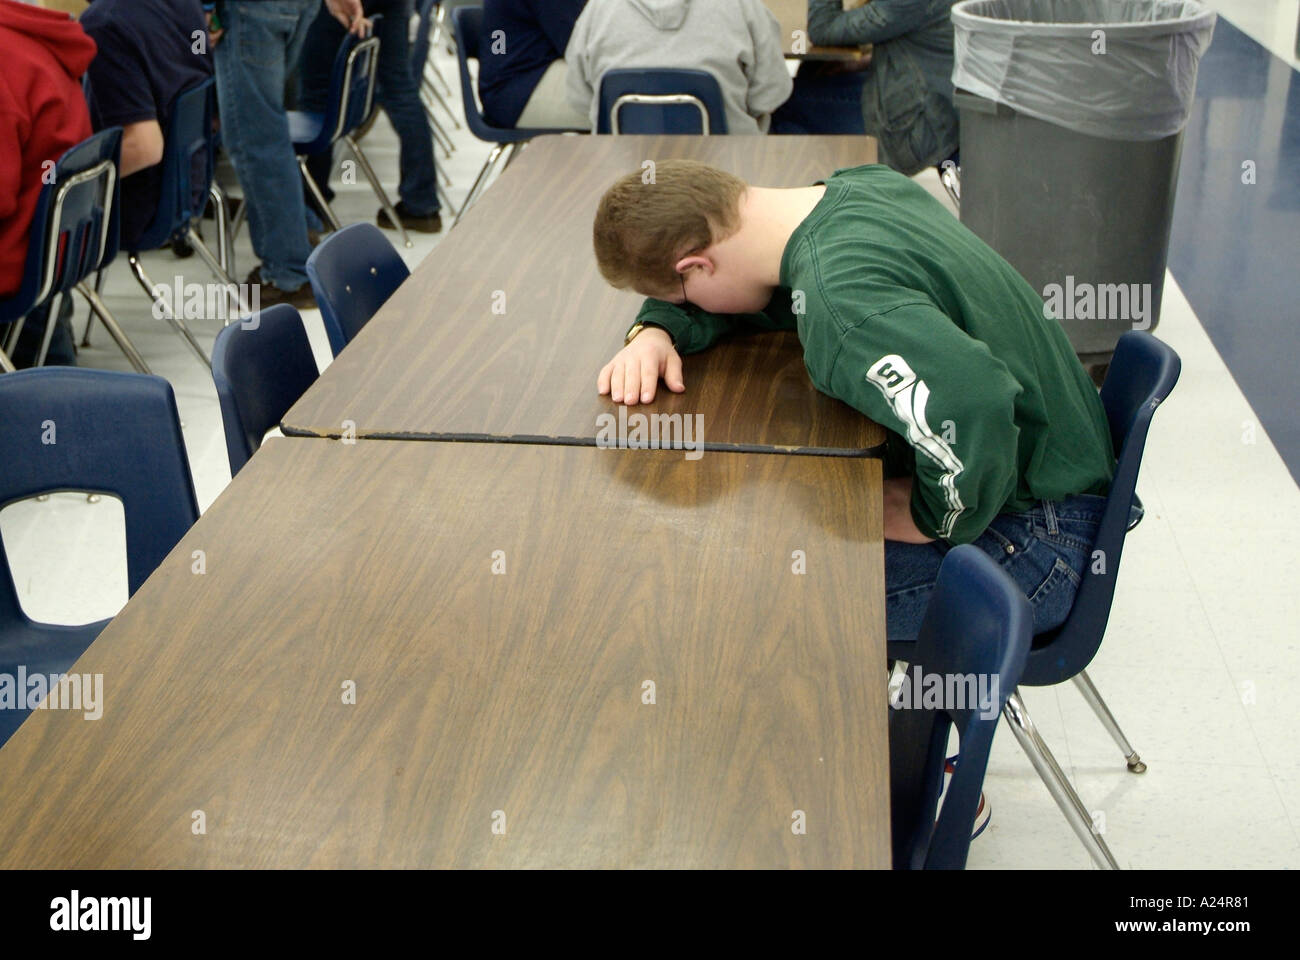 Sick or ill high school student lays head on table in the cafeteria Stock Photo